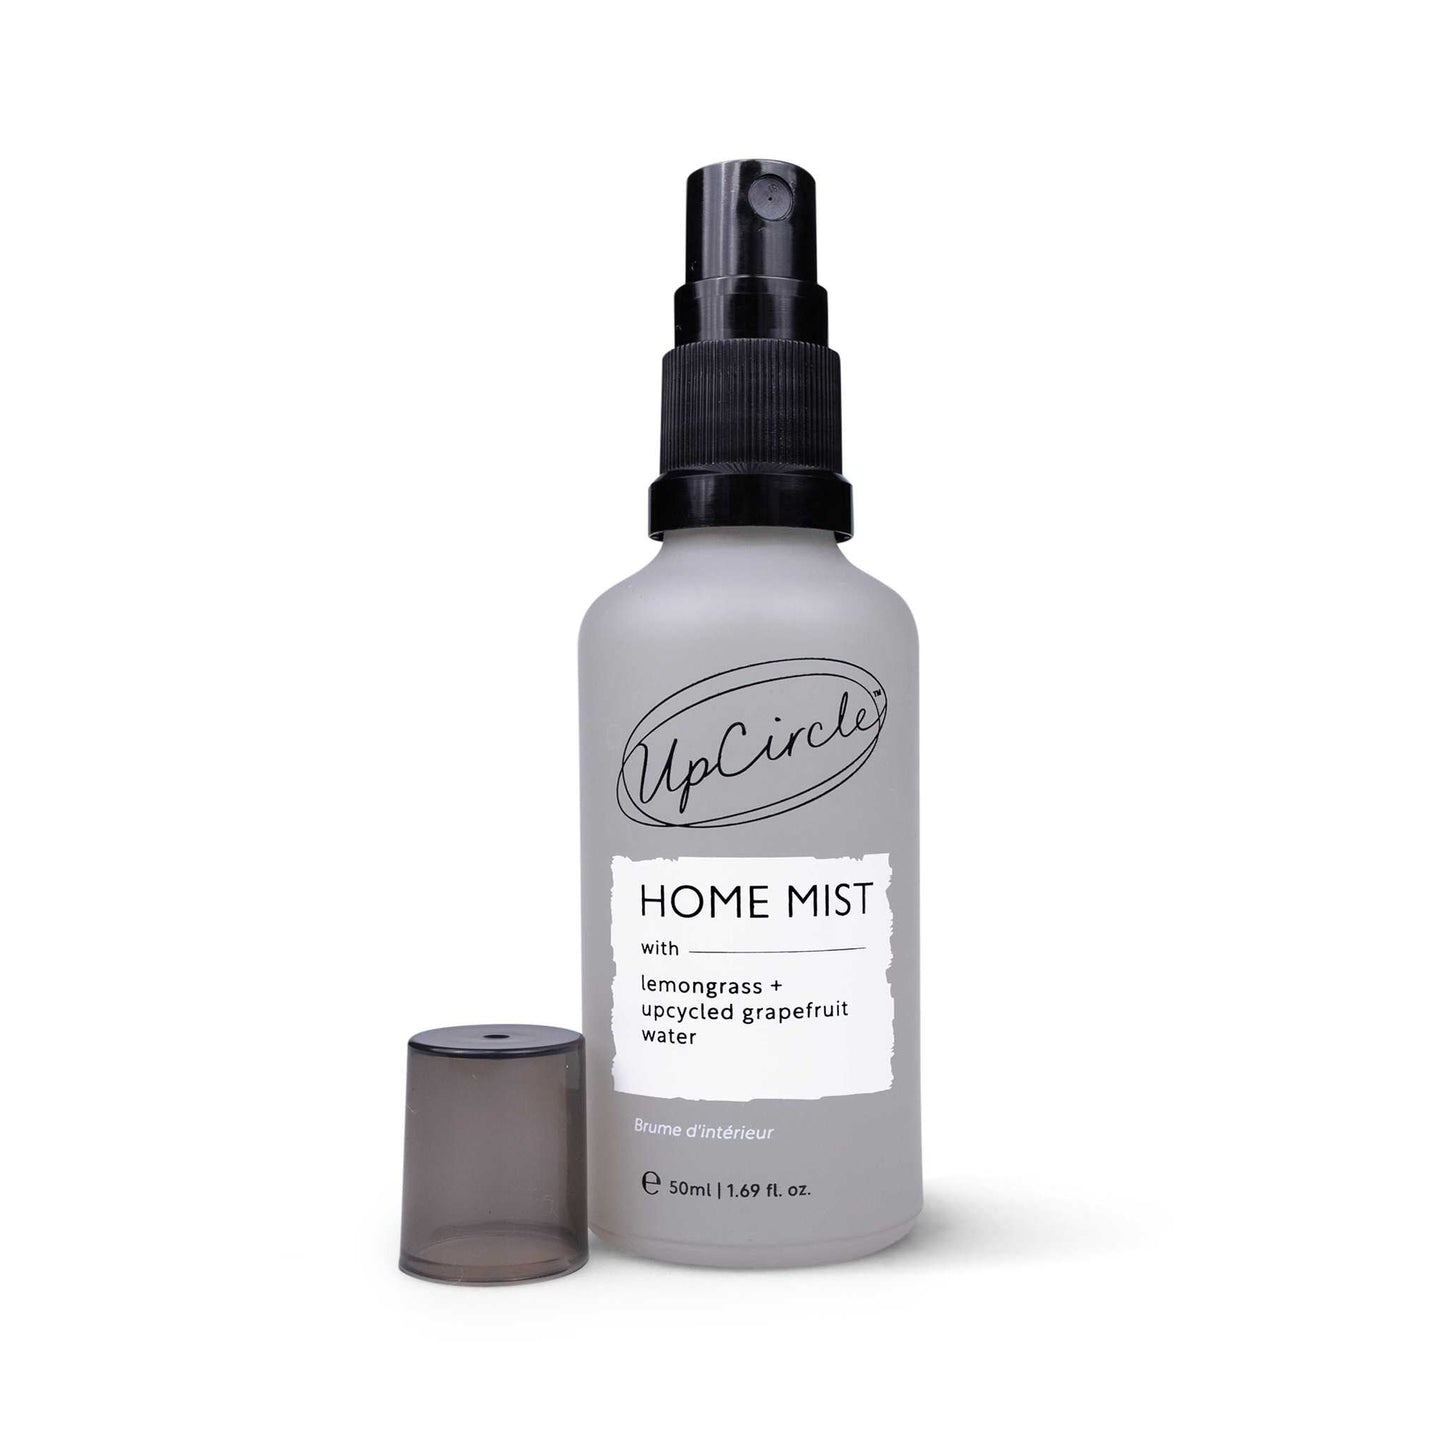 UpCircle Home Fragrance Upcircle Home Mist with Lemongrass & Upcycled Grapefruit Water - 50ml